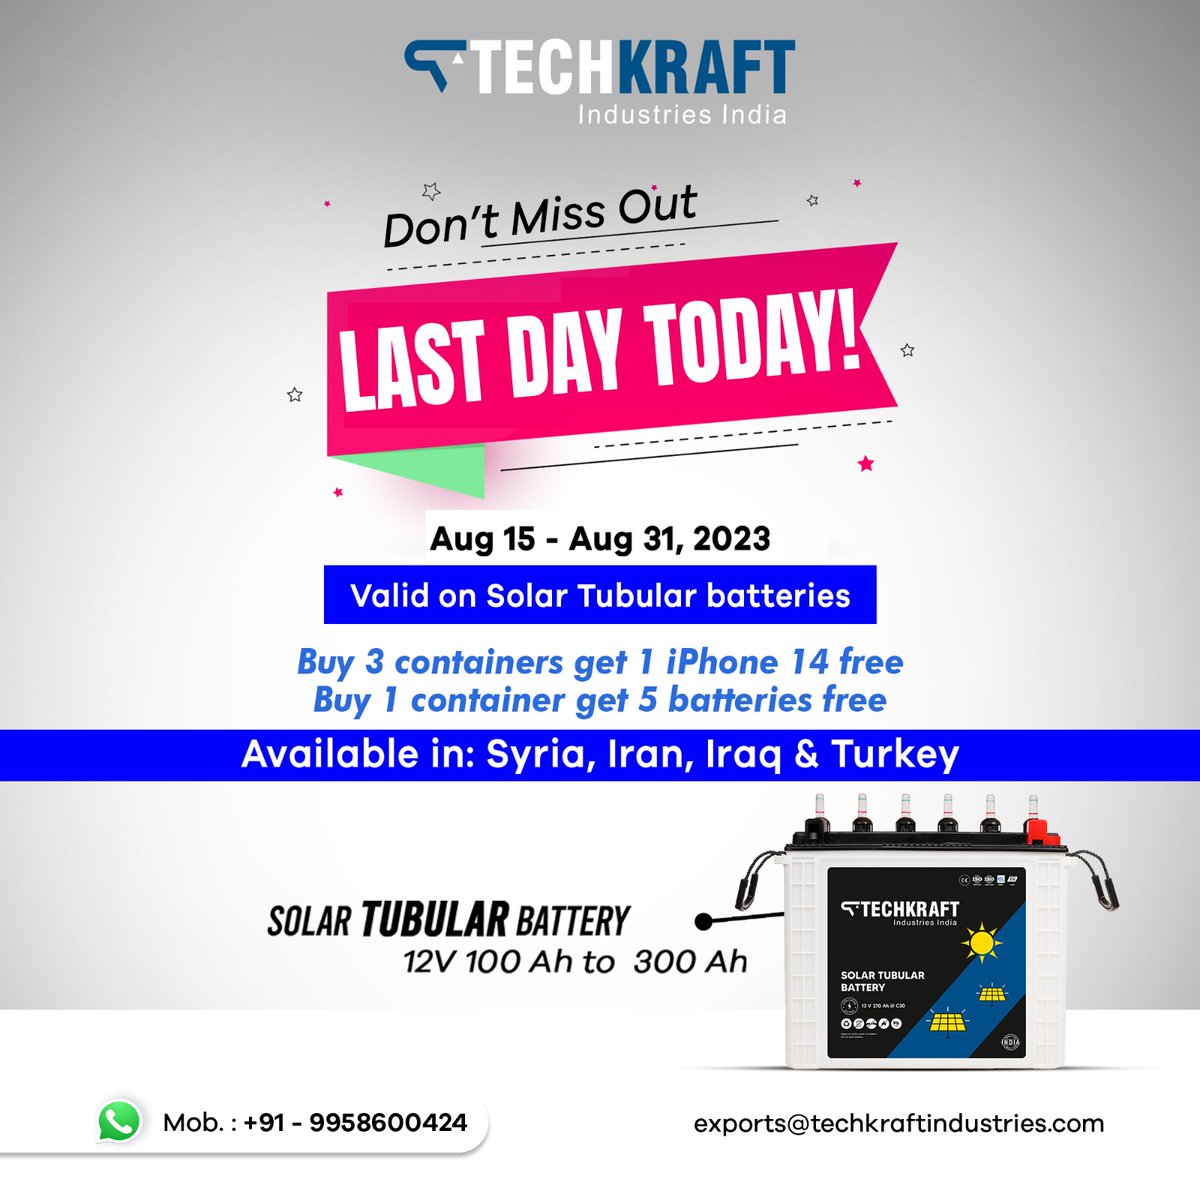 Last Call! Place your order now! -Receive a complimentary iPhone 14 with the purchase of 3 full containers of #solartubularbatteries. -Get 5 extra batteries for free when you buy a full container of solar tubular batteries . . #techkraftbatteries #Battery #batterypower #uaesolar